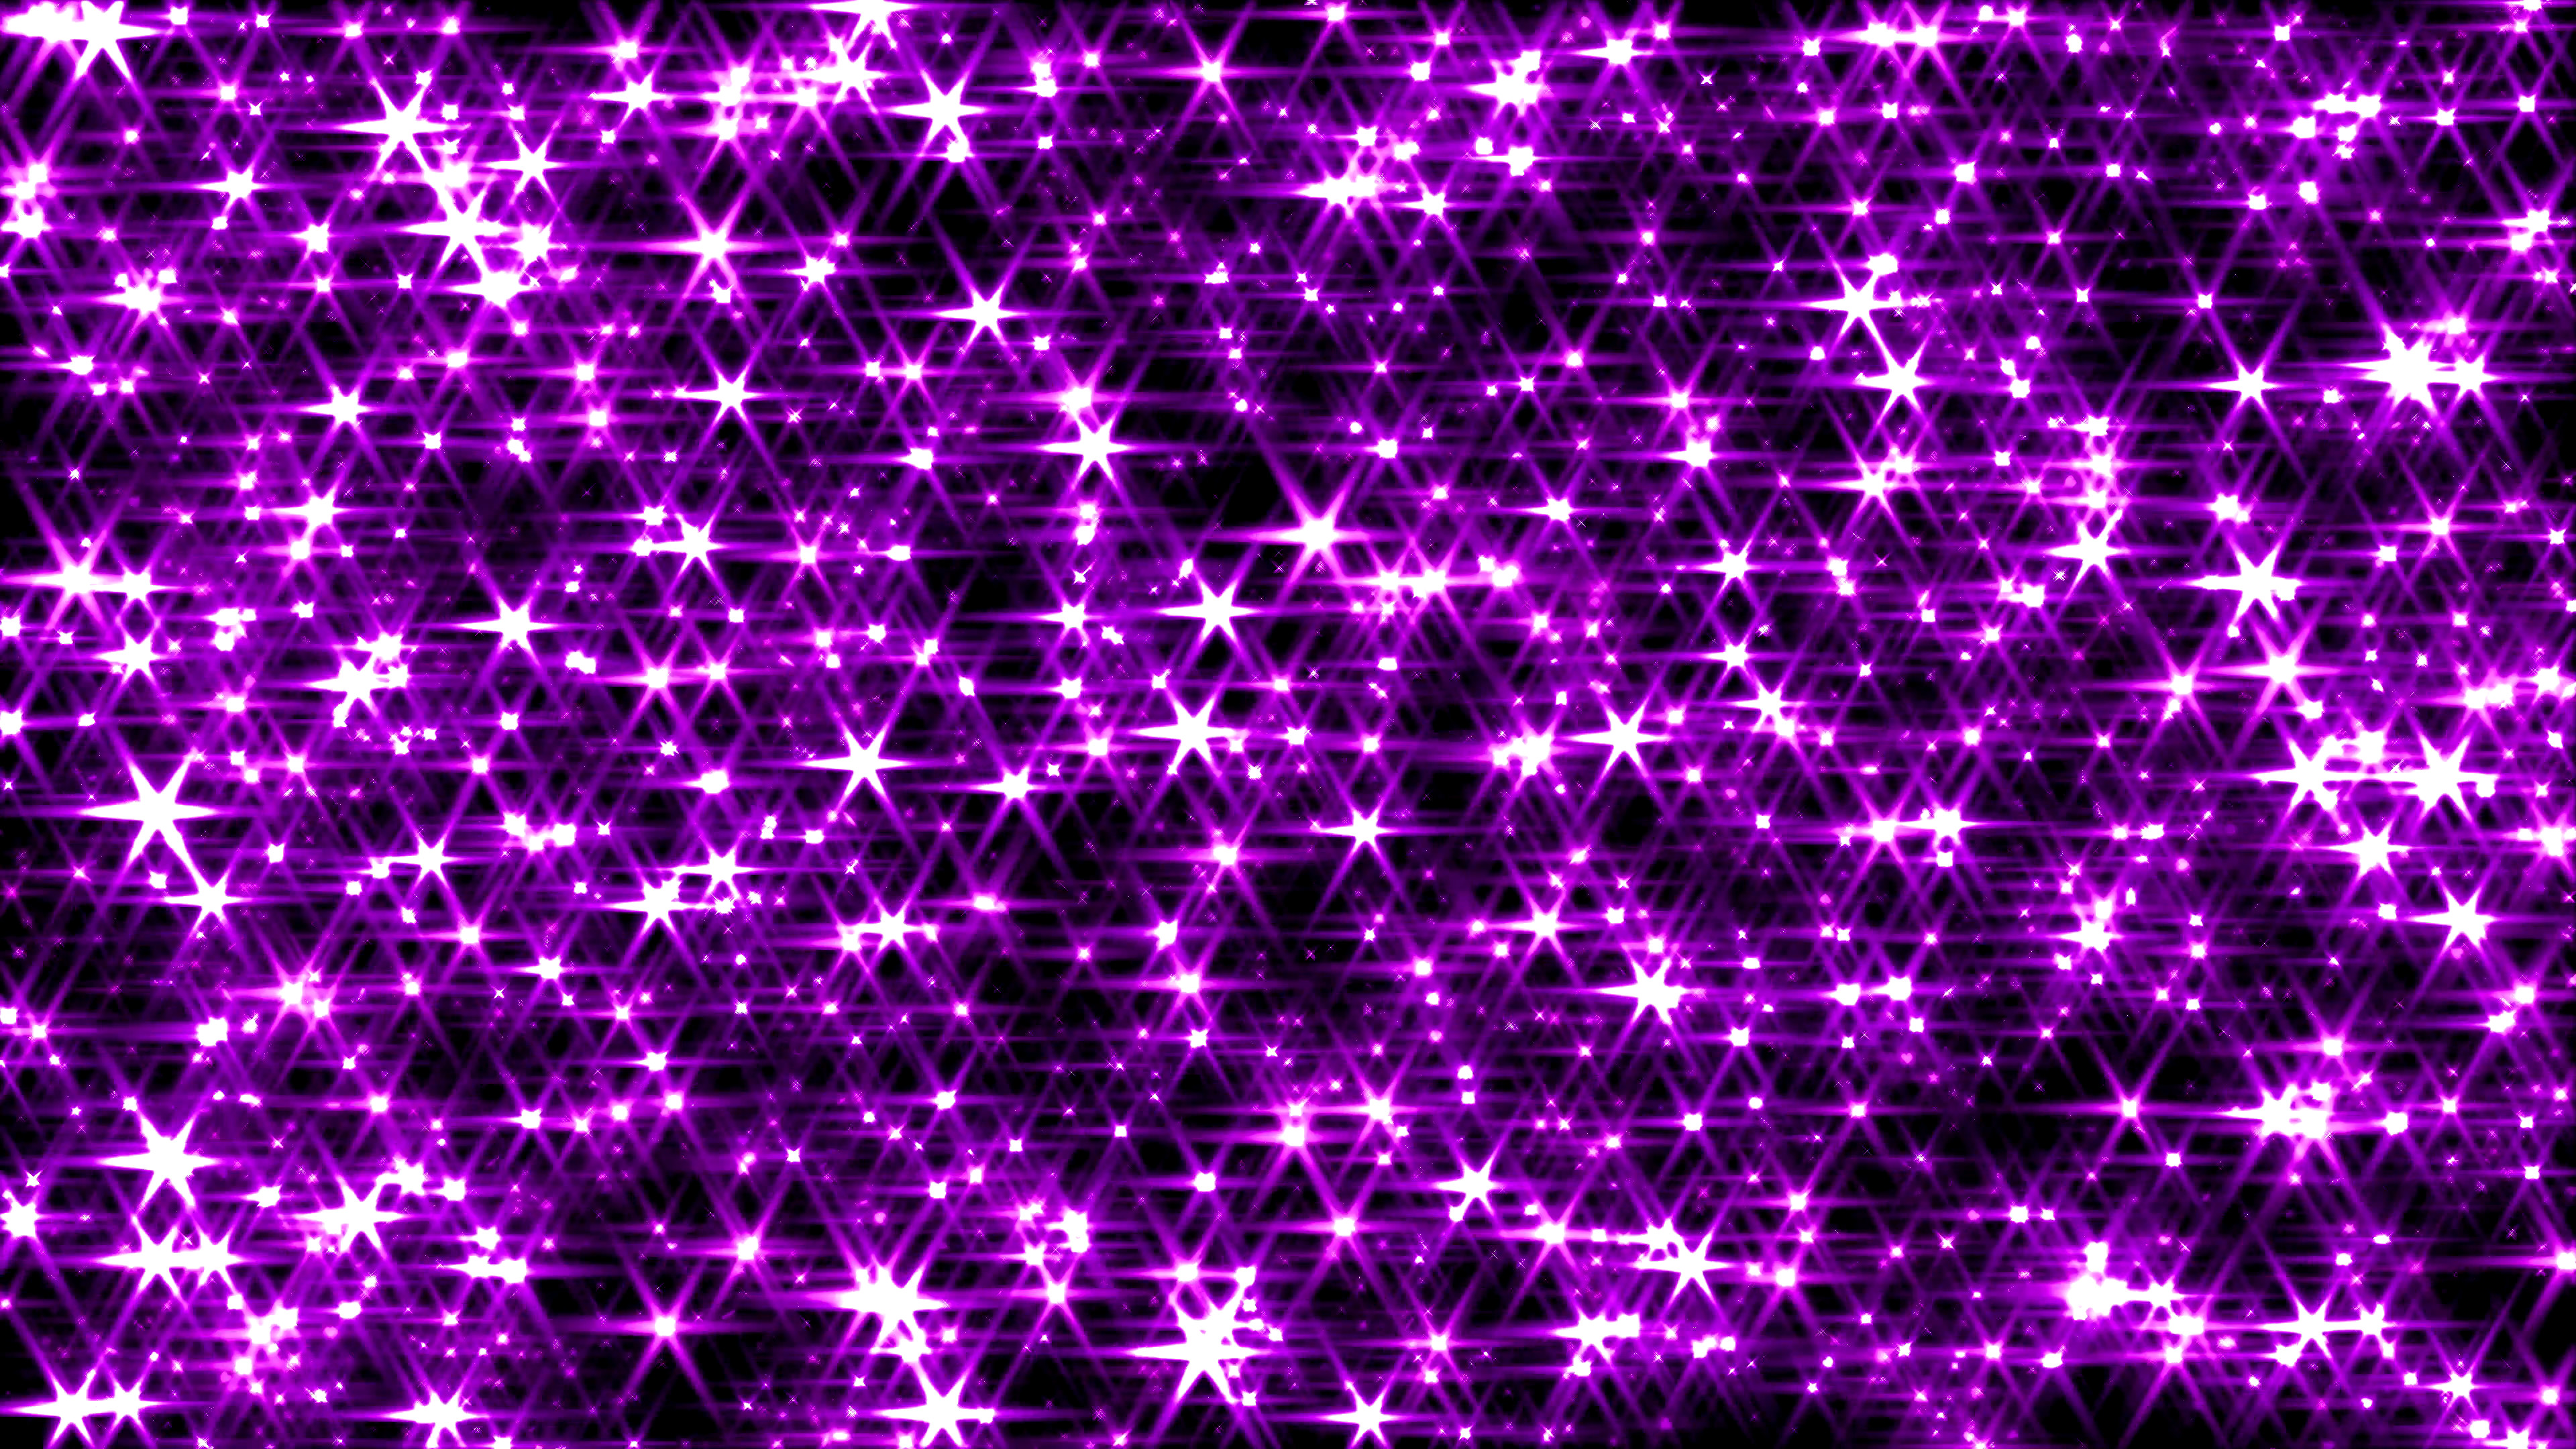 3840x2160 Sparkly Backgrounds That Move